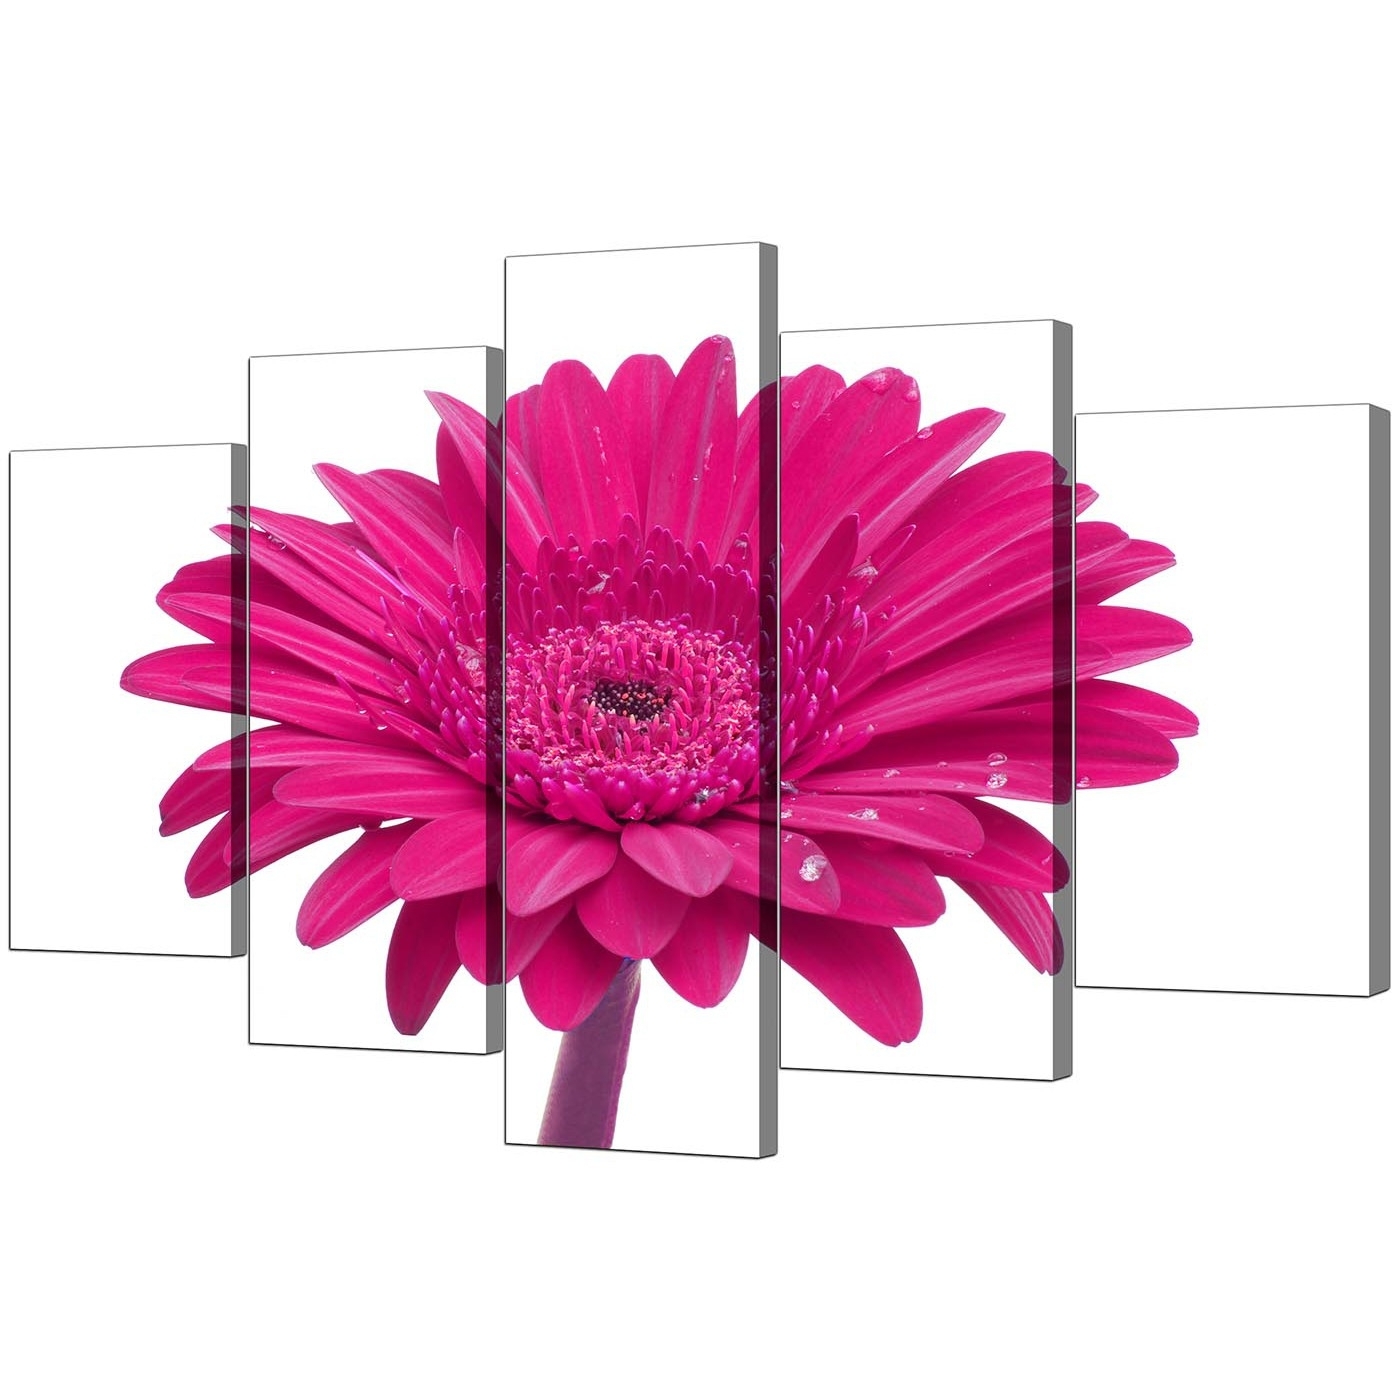 15 Best Collection of Pink Flower Wall Art